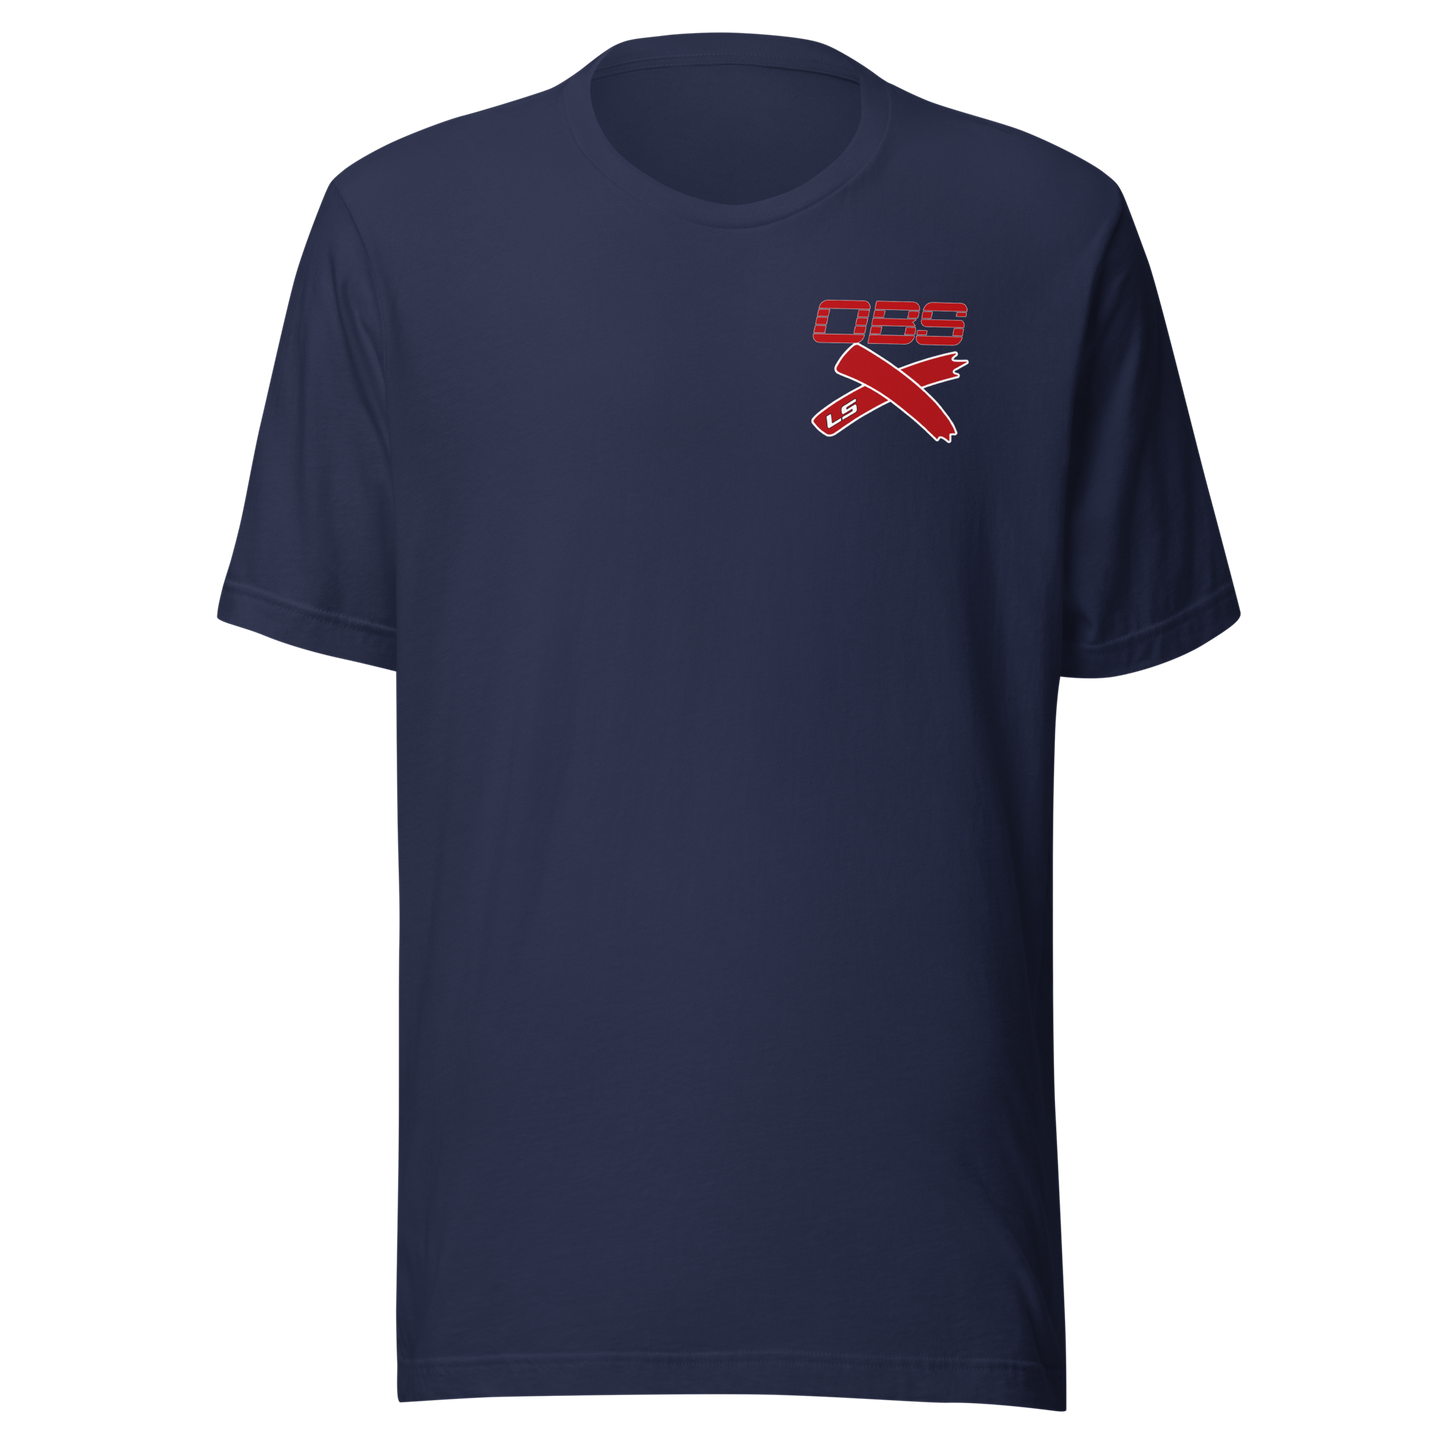 OBS LSX Chevy, GMC K1500 Red Extended Cab 4x4 Short-Sleeve Unisex T-shirt